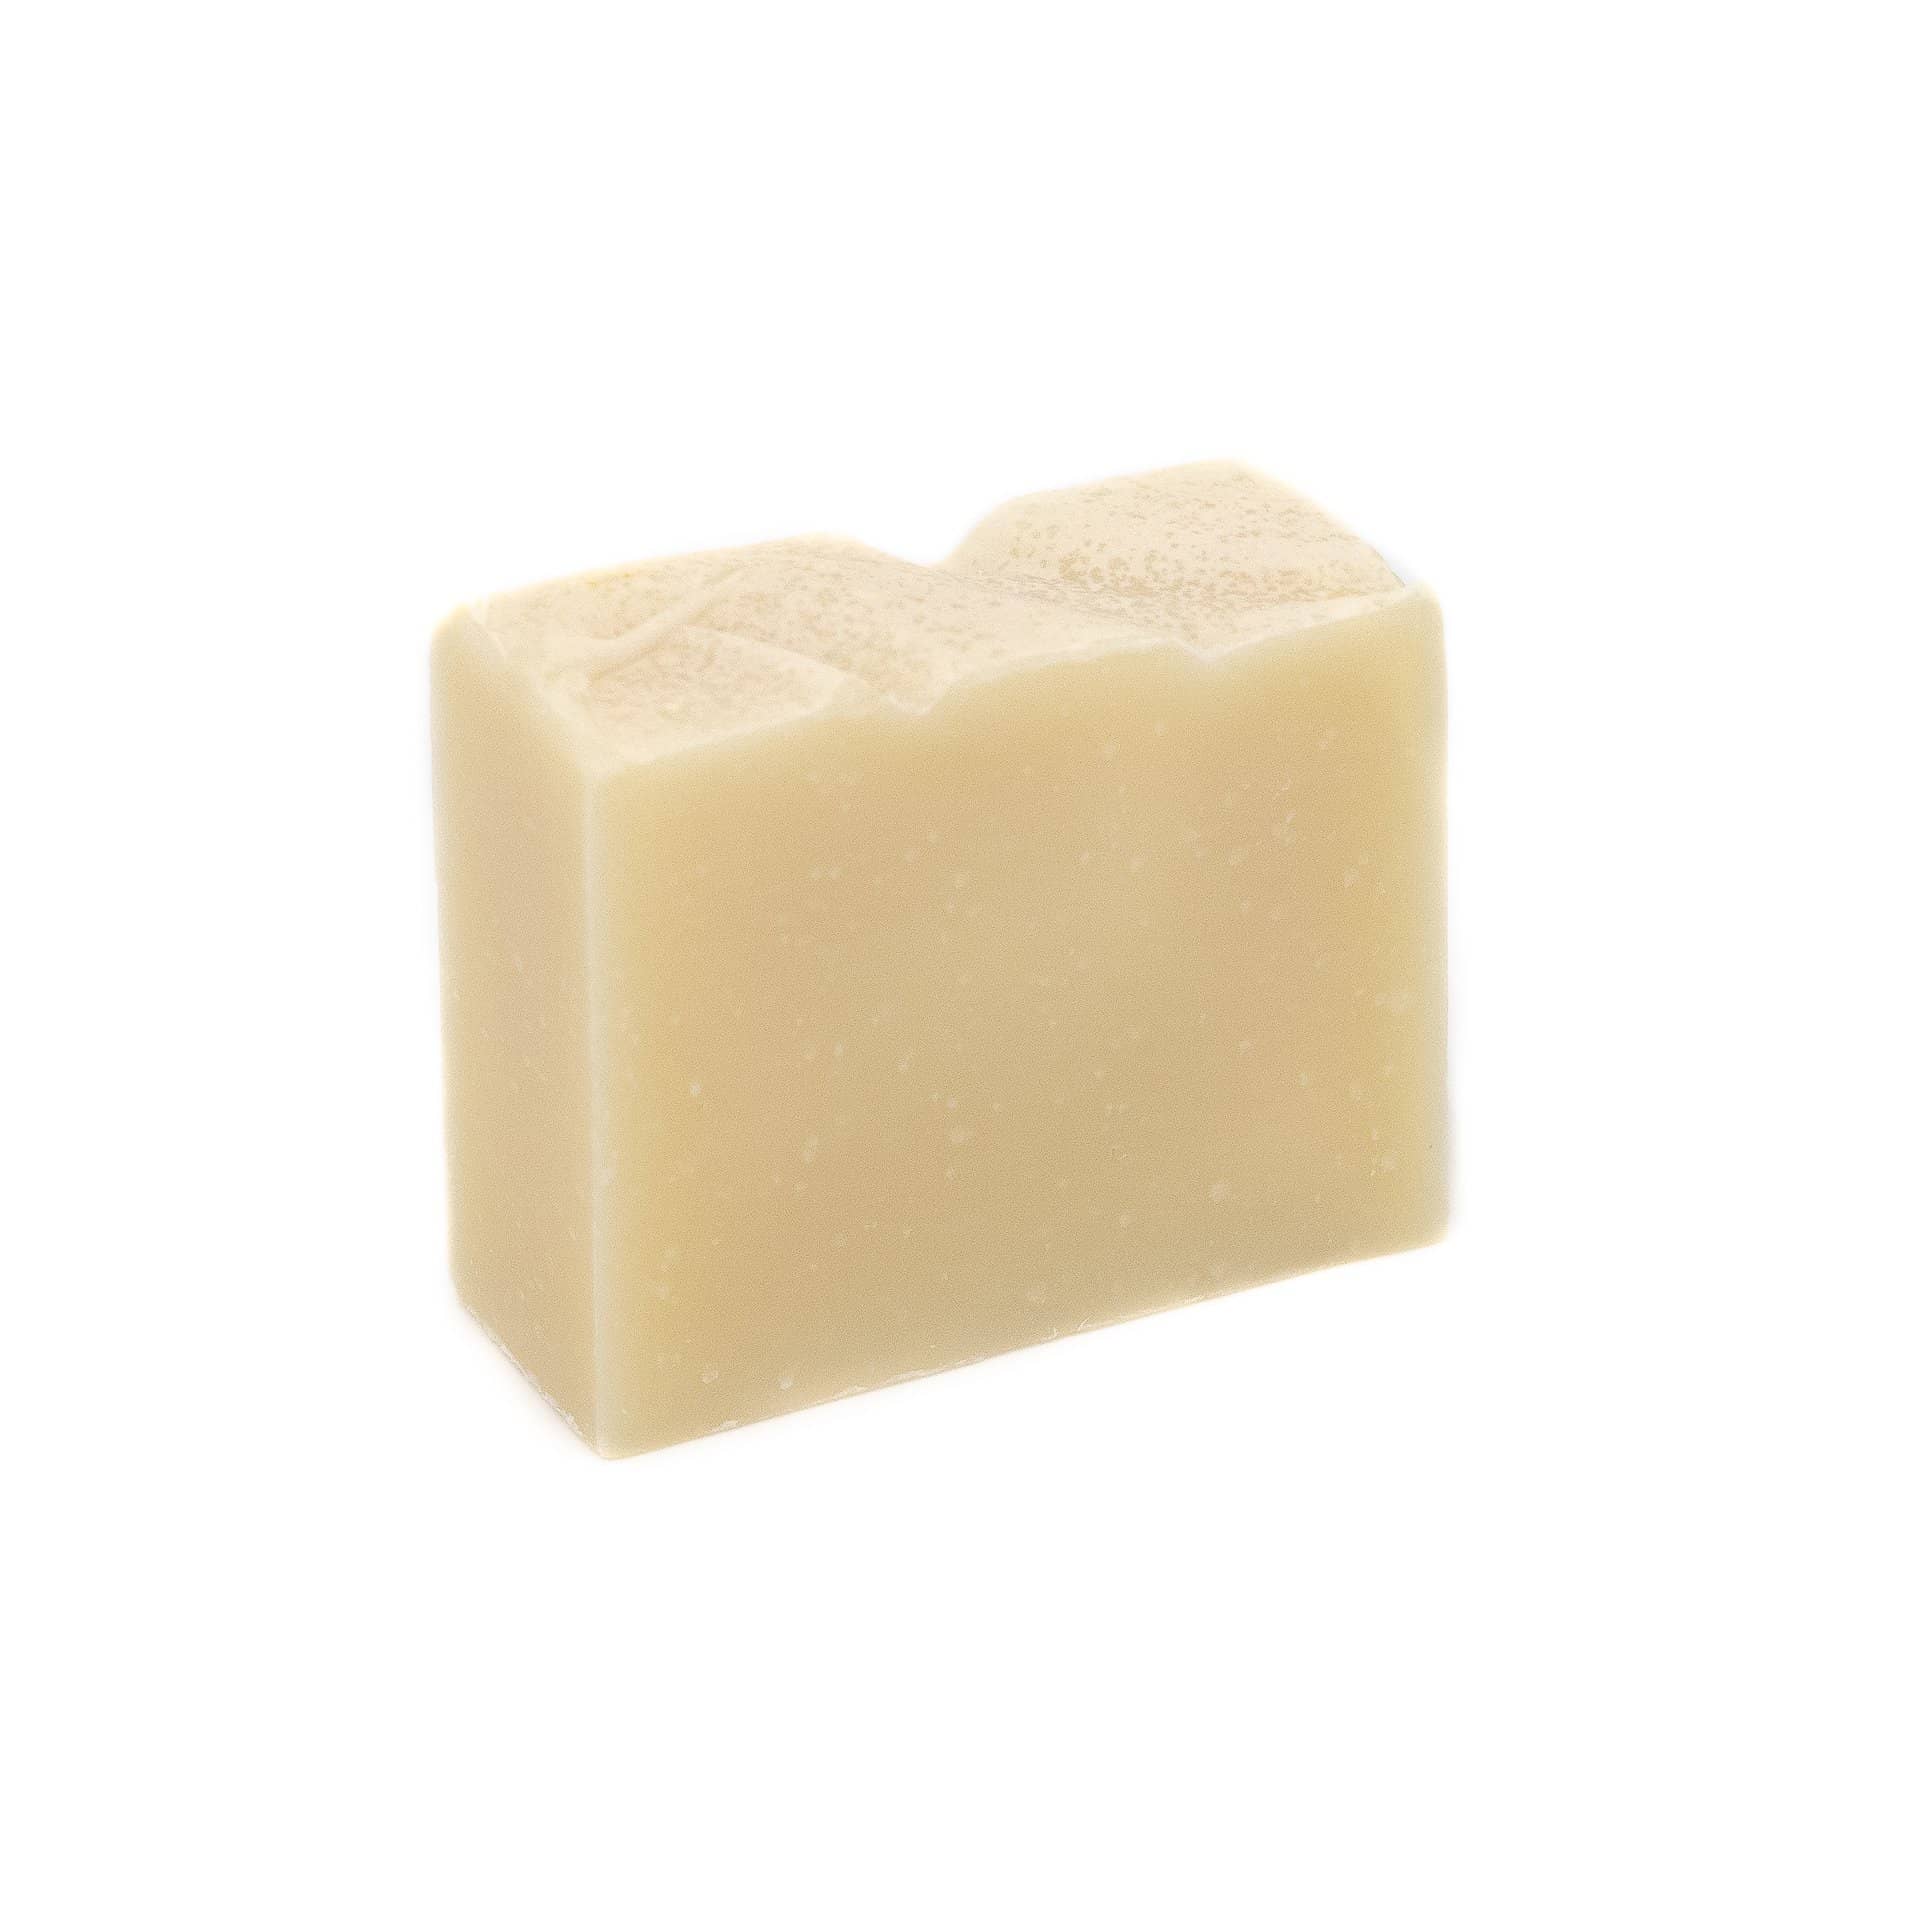 Natural Dog Soap - Clearstone